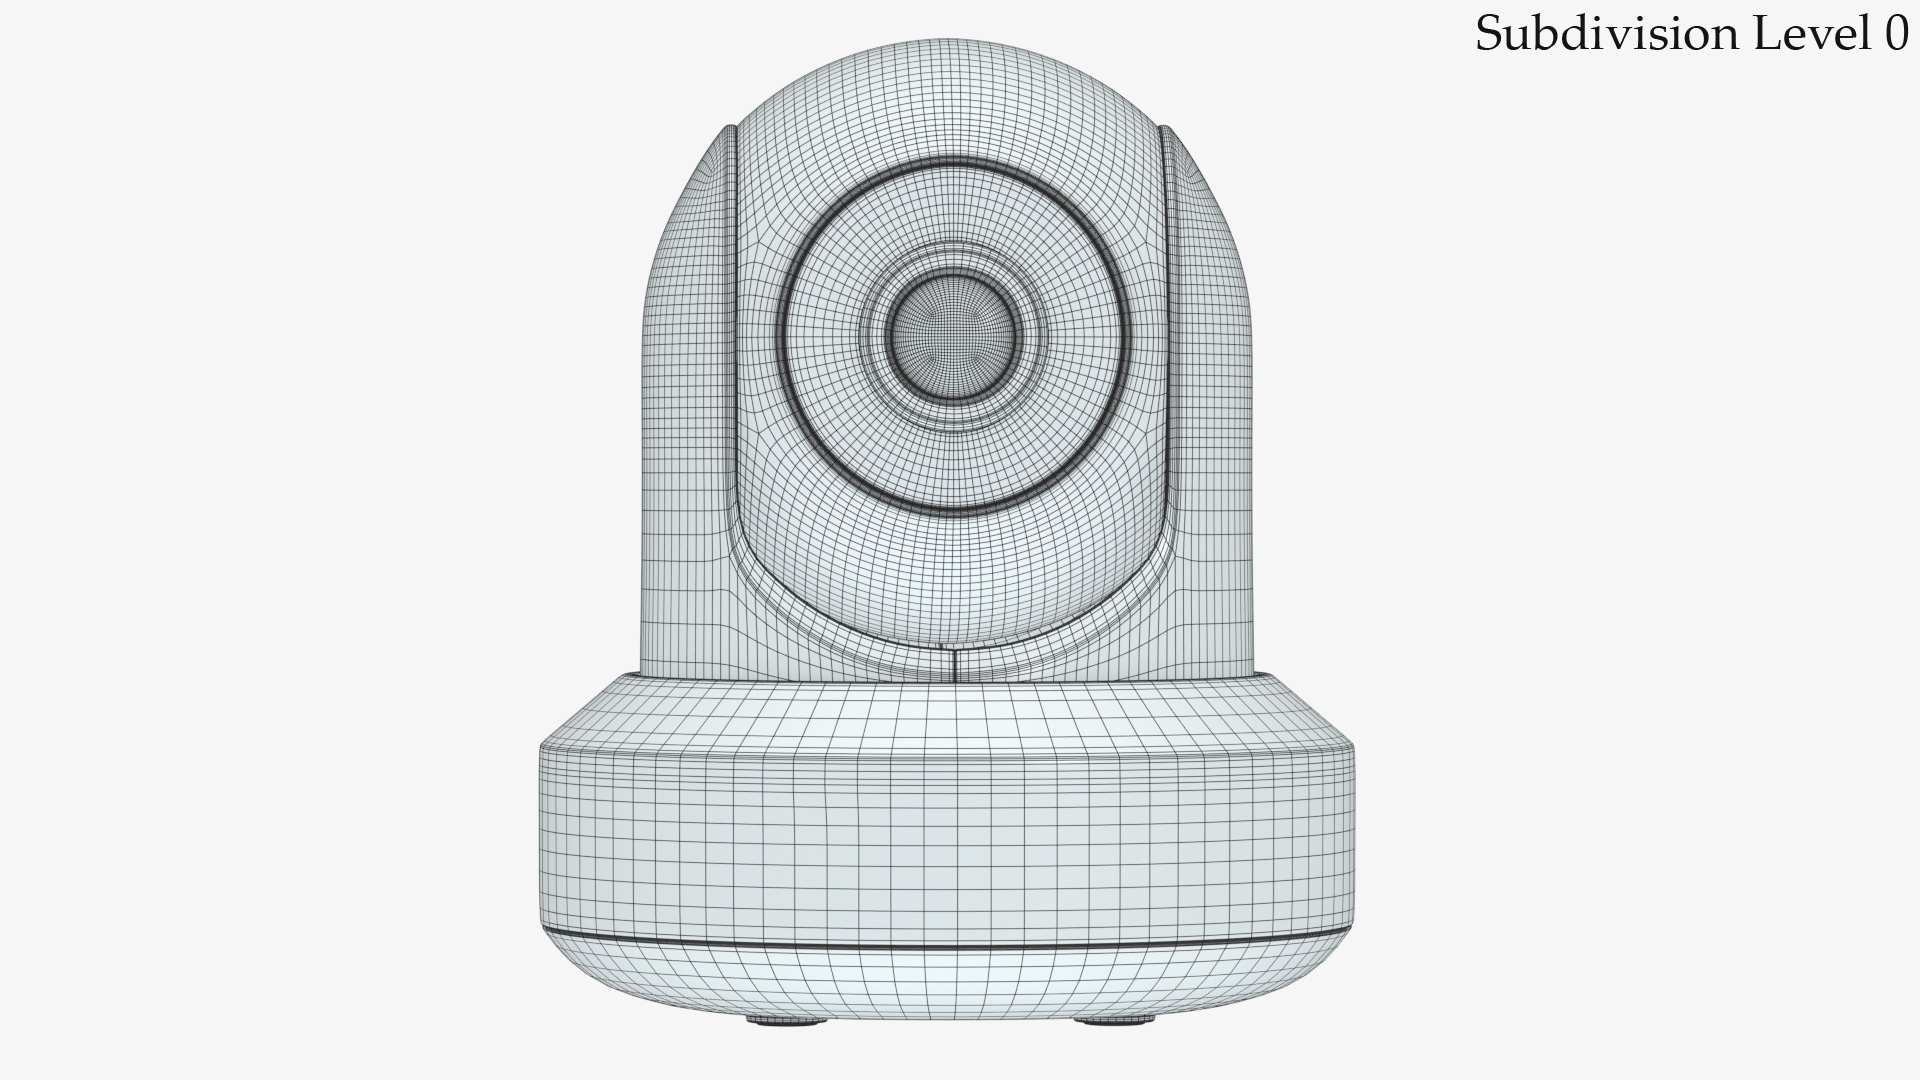 Round Web Camera For Computer Or Laptop 3D Illustration. Drawing Of Webcam  Or Equipment For Video Calls Or Communication In 3D Style On White  Background. Technology, Network Or Internet, Media Concept Royalty